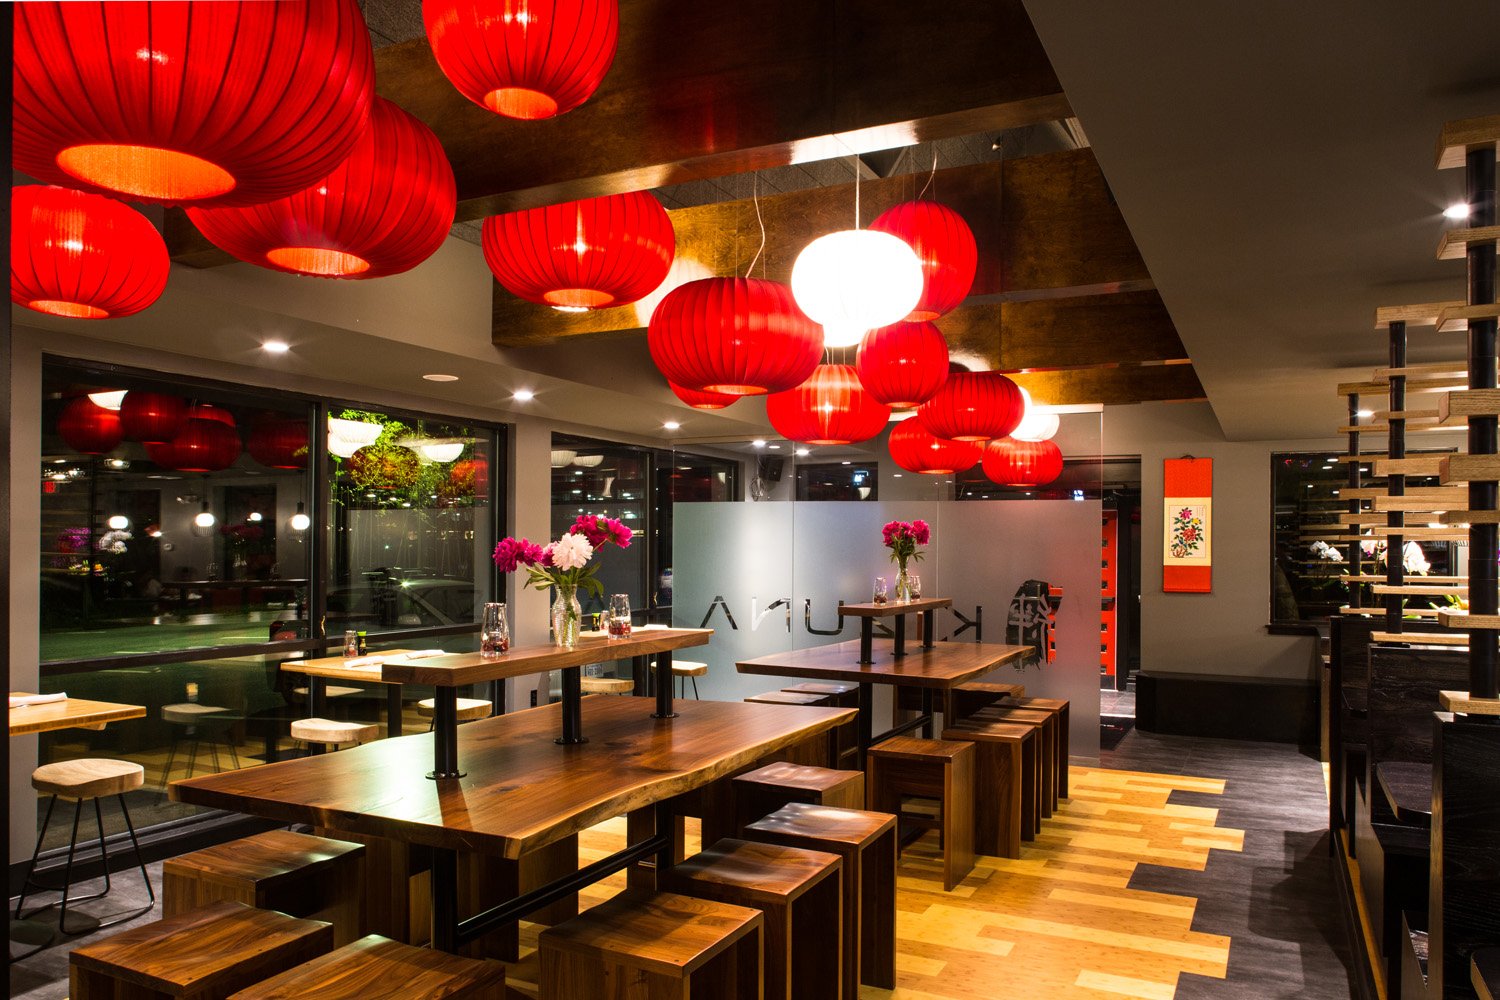 Centerville-VA-interior-of-Japanese-restaurant-displaying-custom-built-wood-stools-and-tables